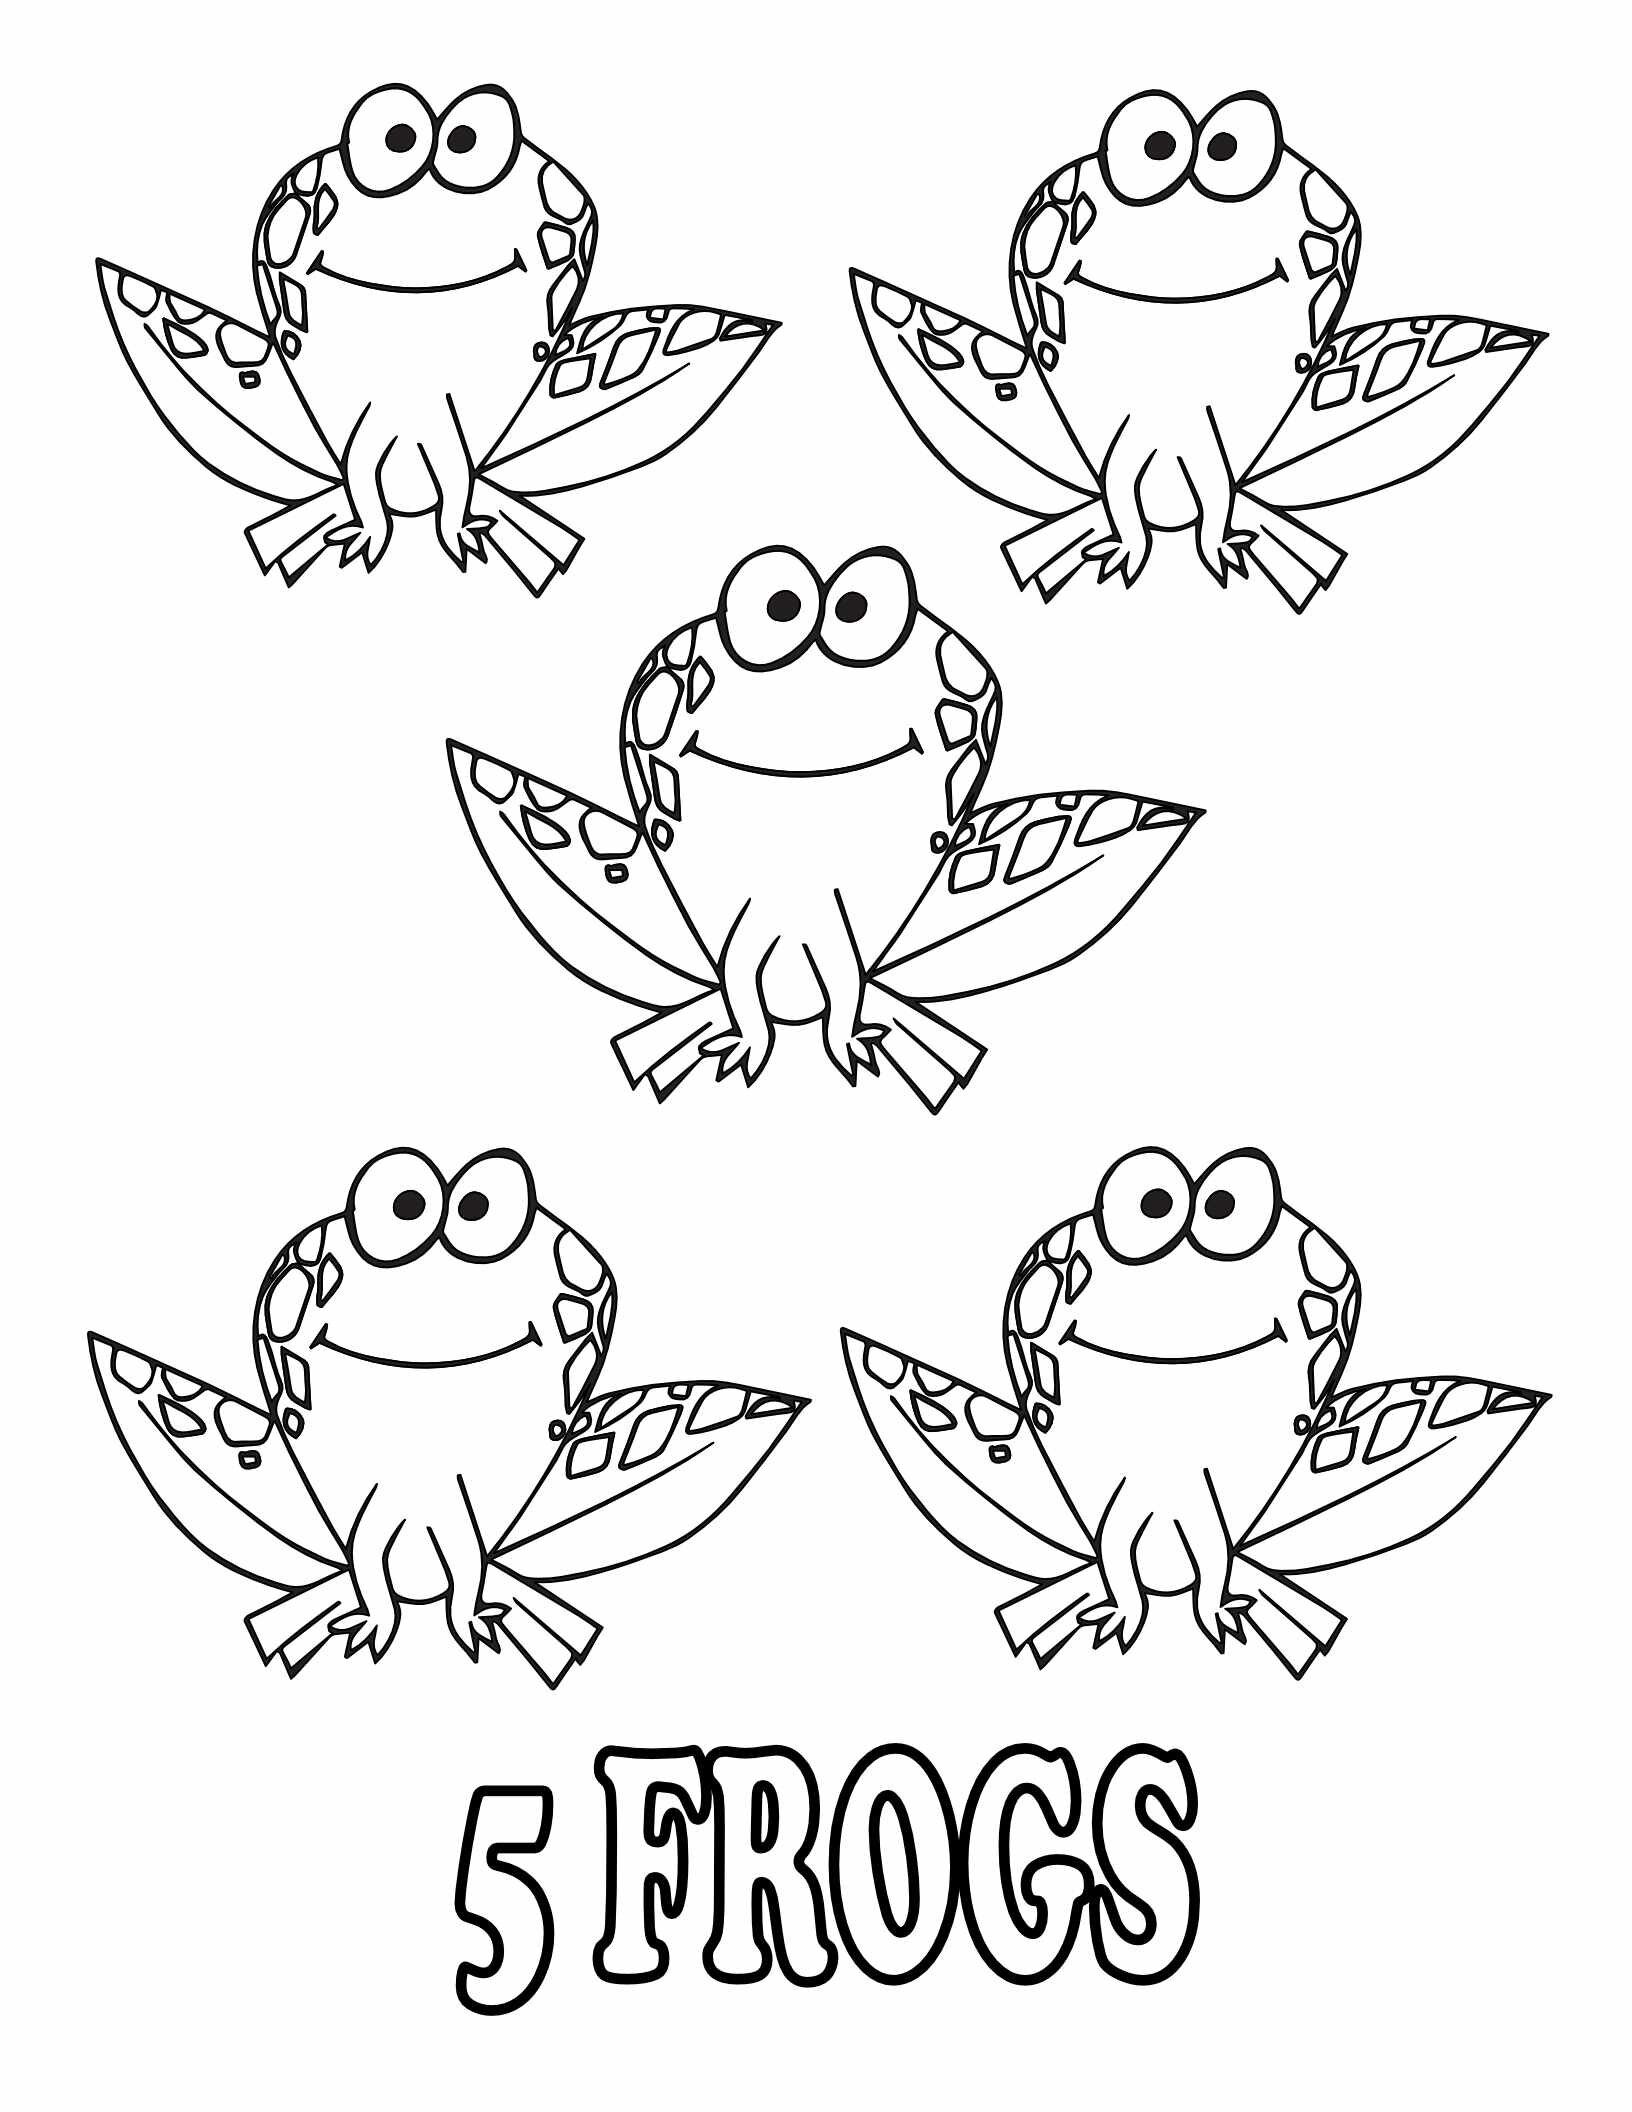 10 Free Animal Number Coloring Pages -  5 Frogs